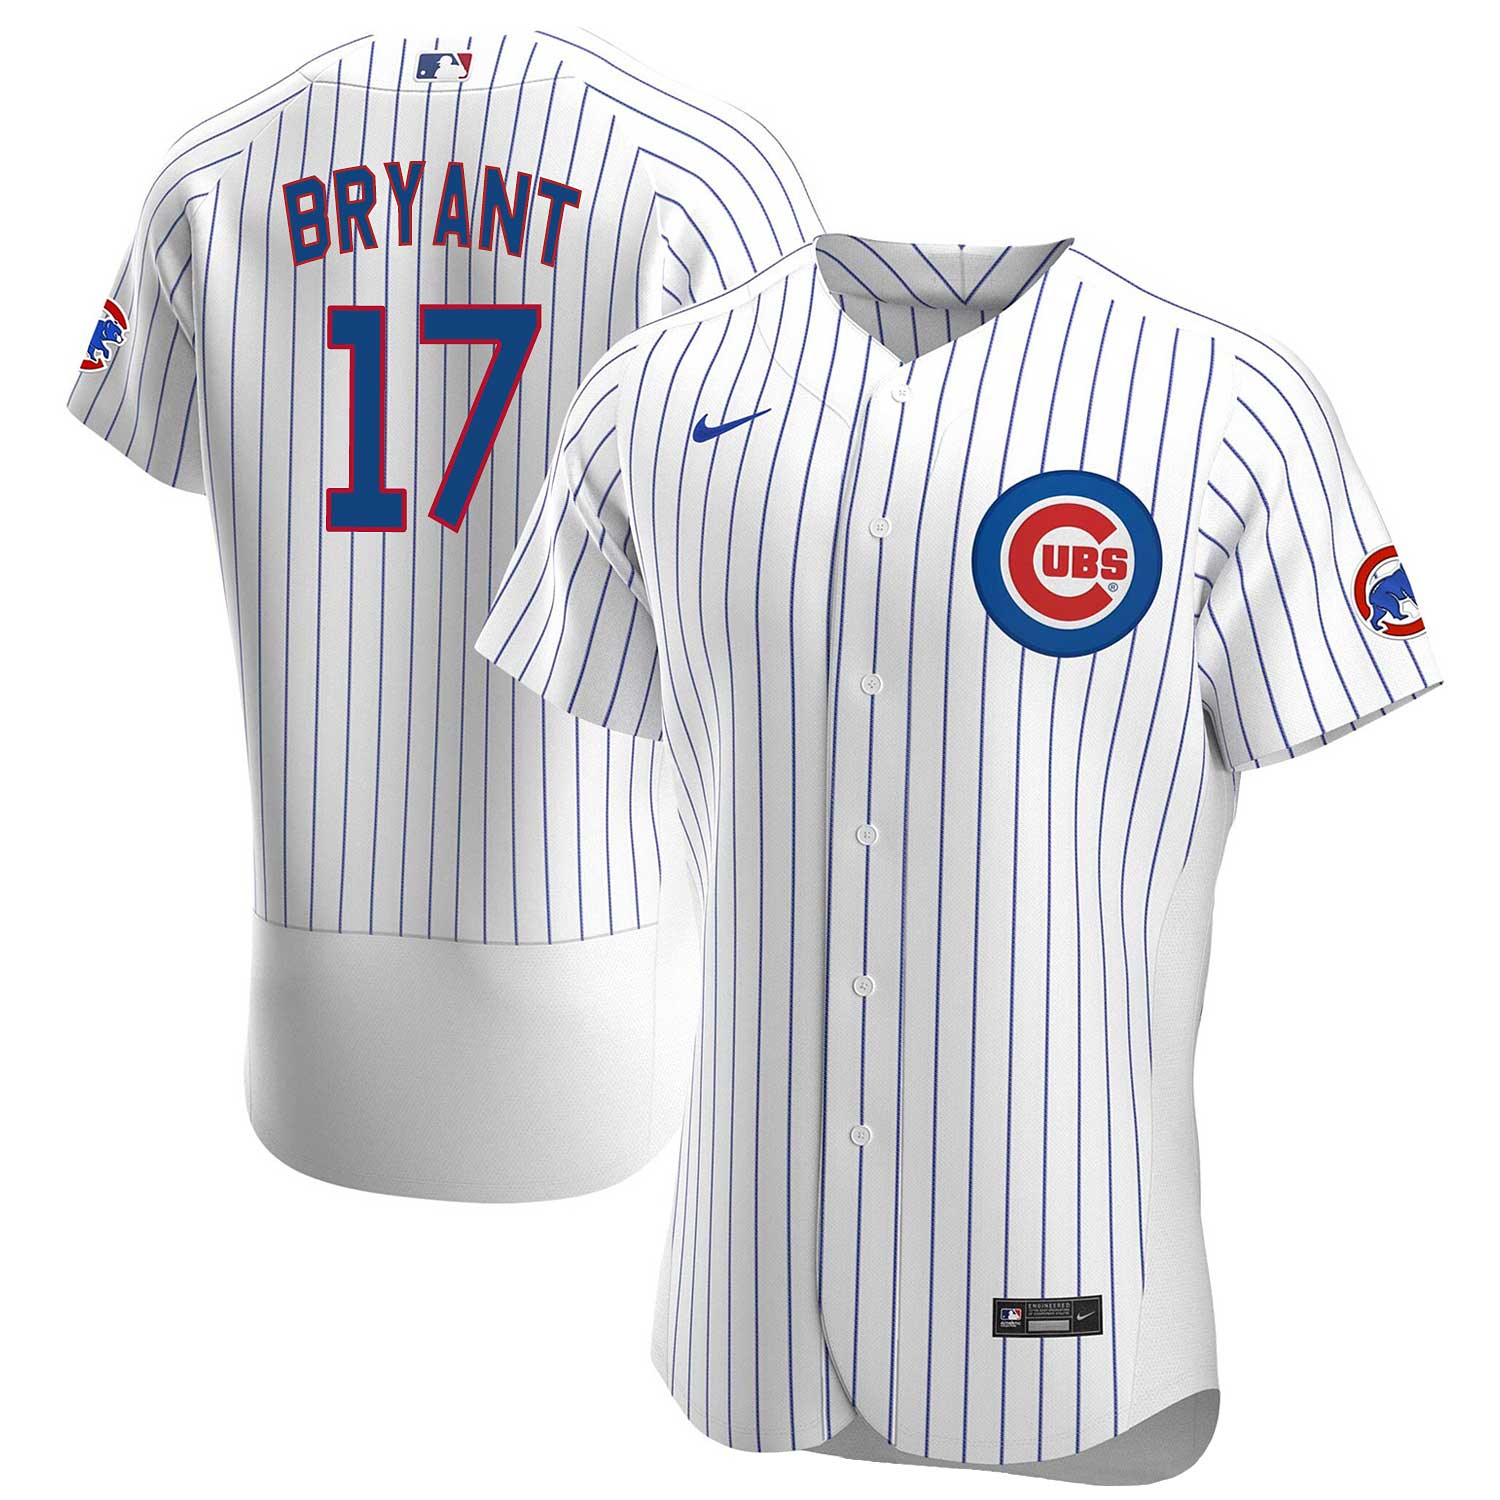 Chicago Cubs Kris Bryant Nike Home Authentic Jersey 44 = Medium / Large